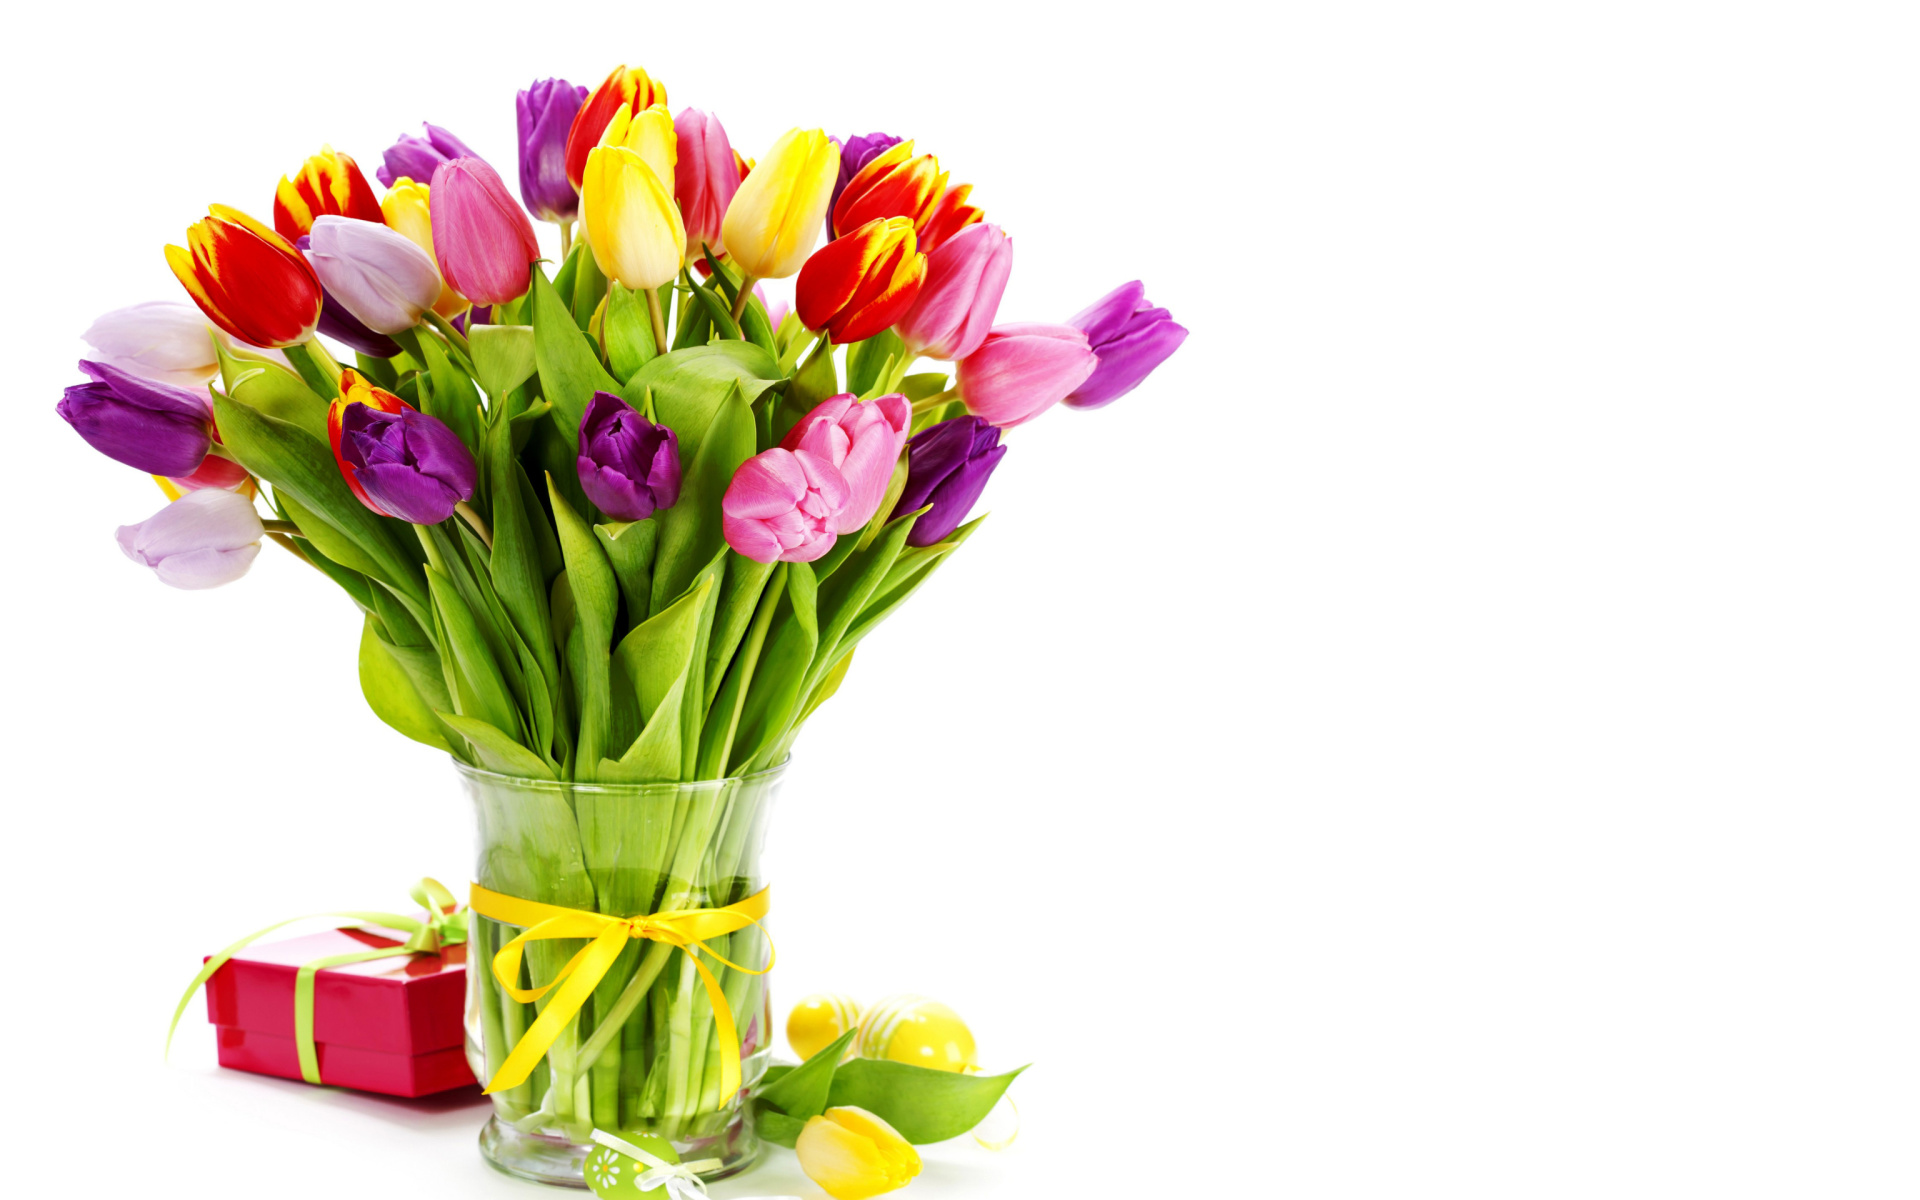 Tulips Bouquet and Gift wallpaper 1920x1200